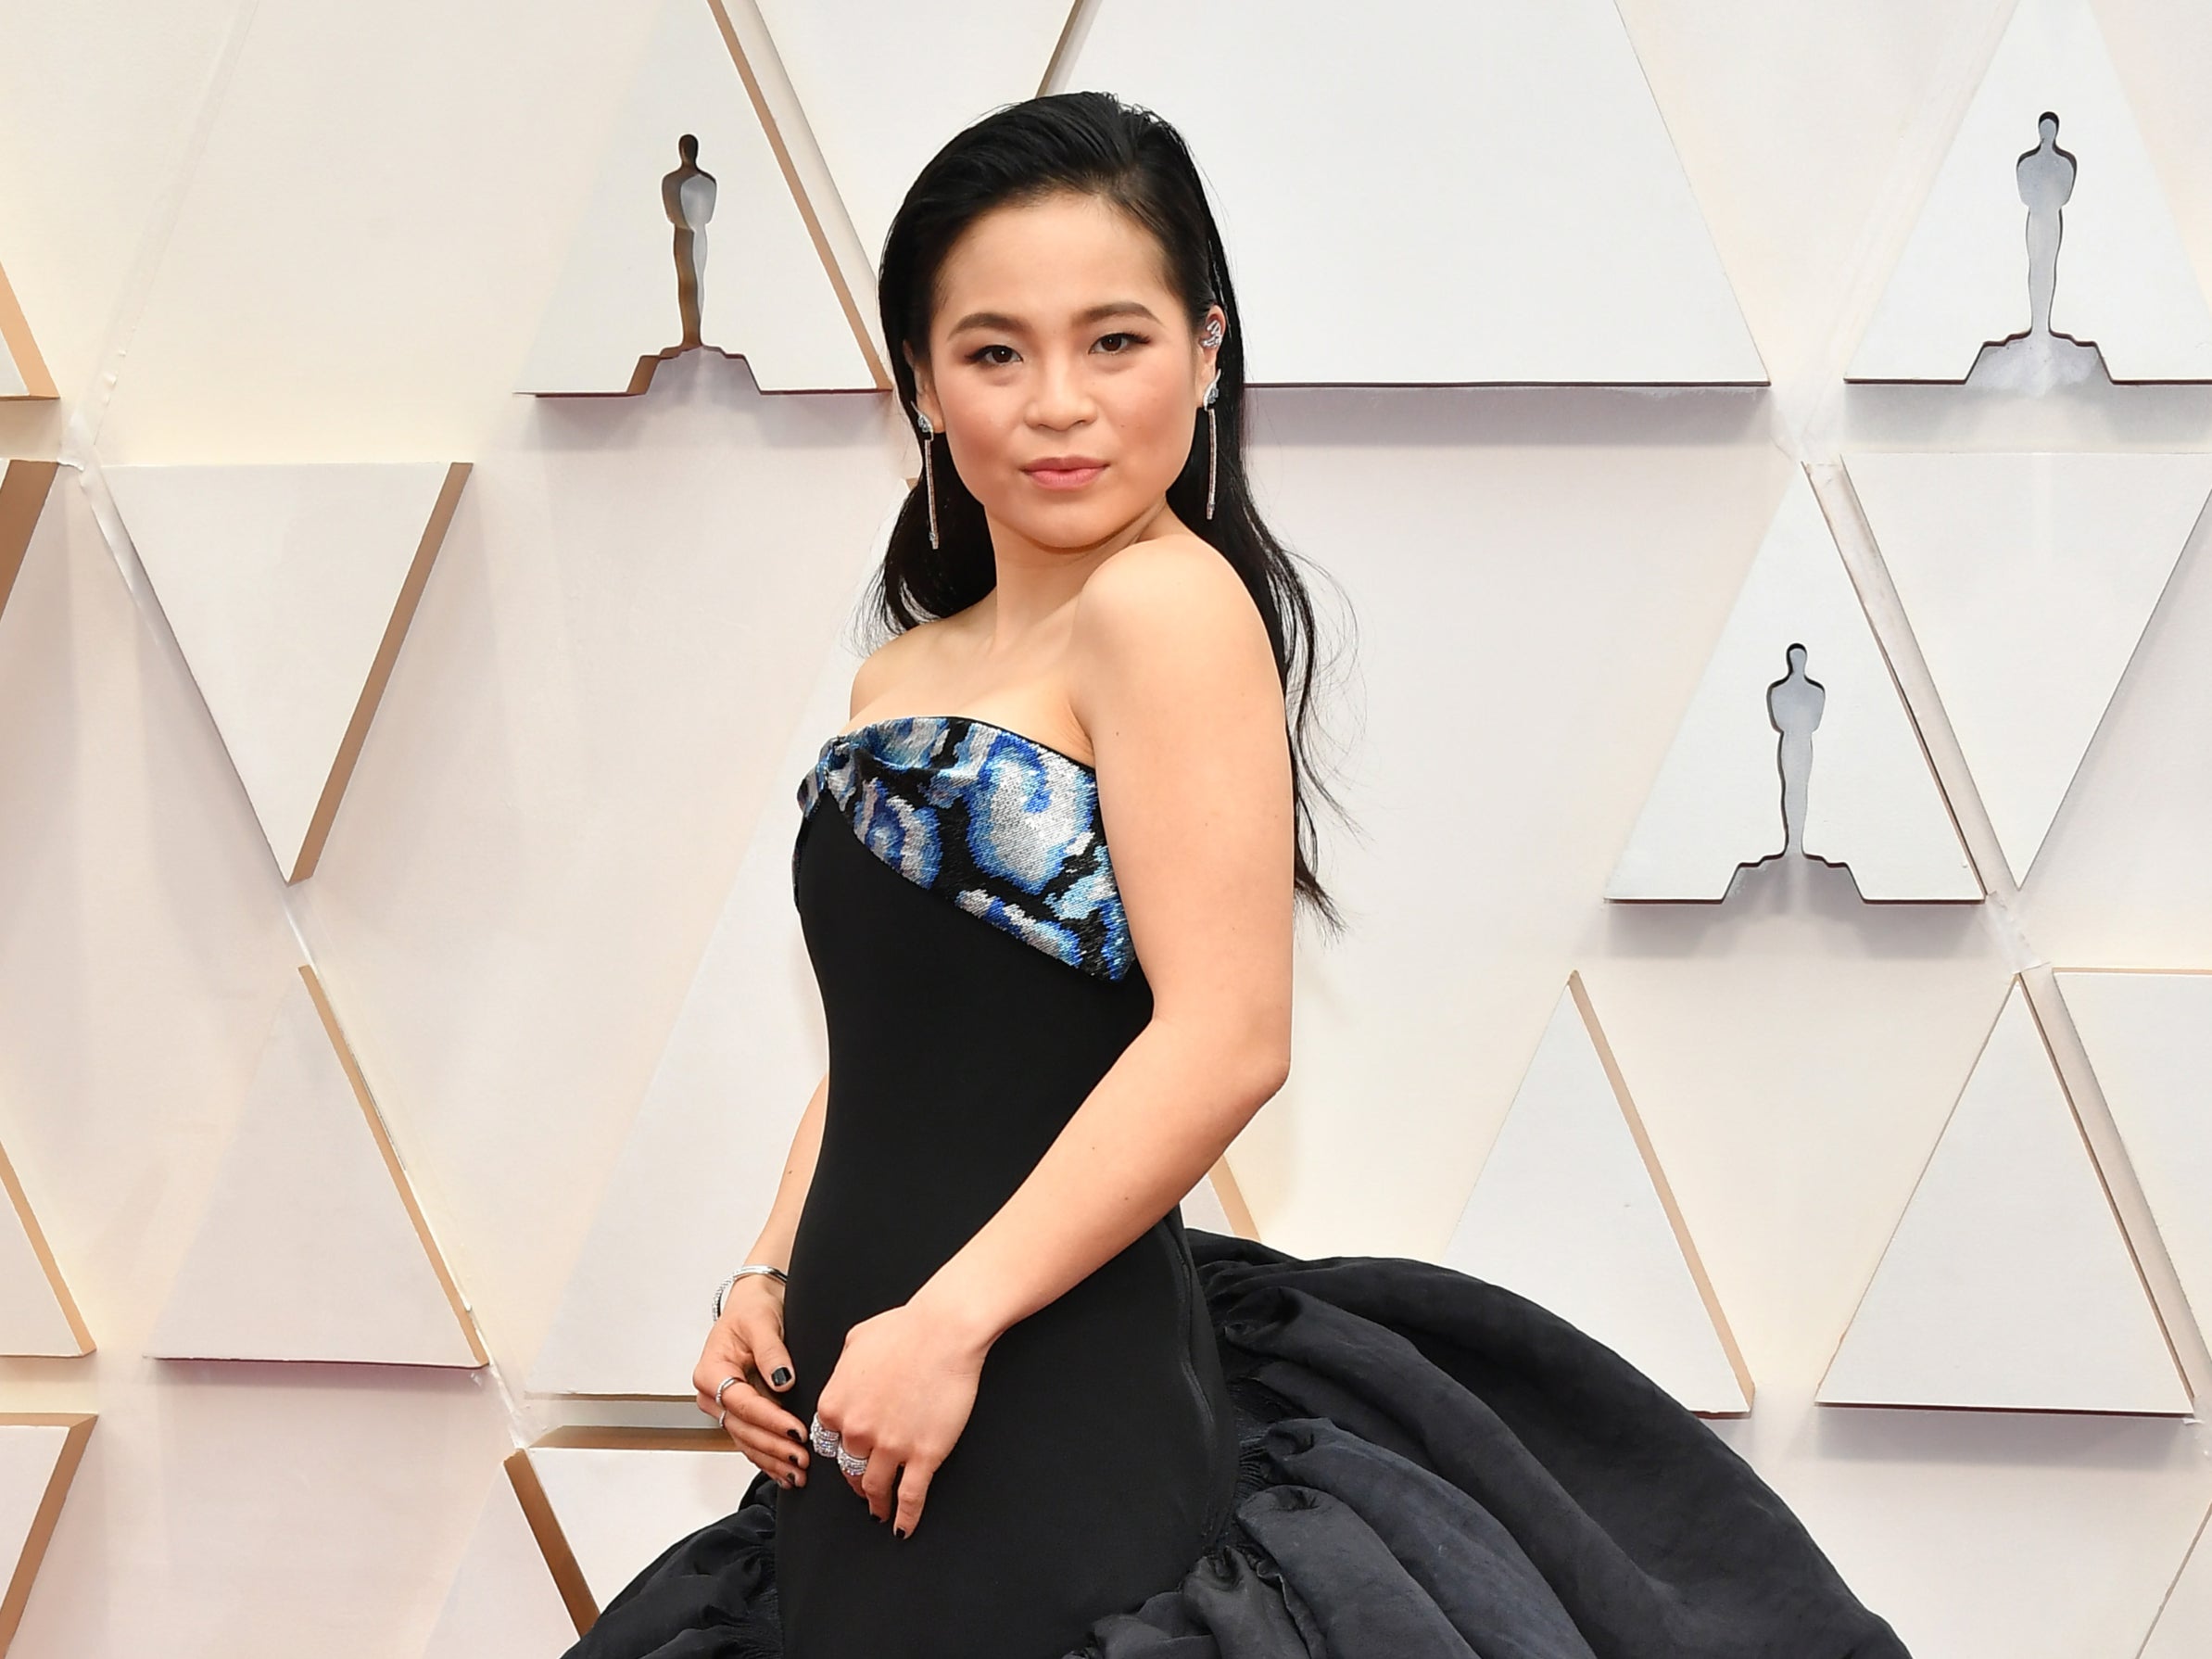 Kelly Marie Tran at the 92nd Annual Academy Awards on 9 February 2020 in Hollywood, California